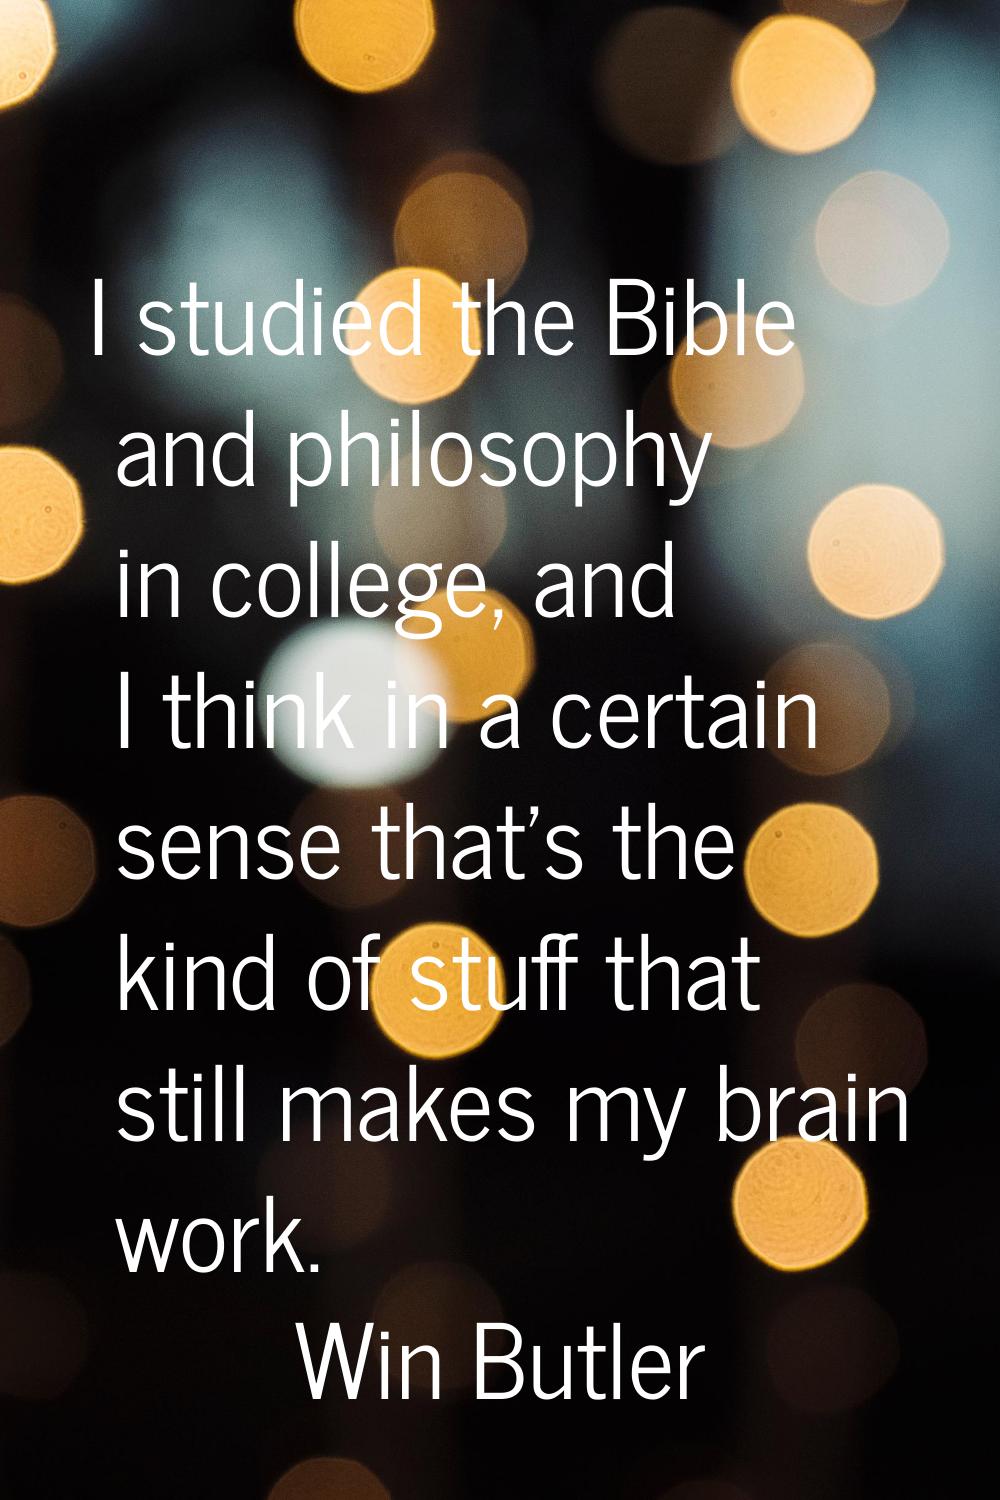 I studied the Bible and philosophy in college, and I think in a certain sense that's the kind of st